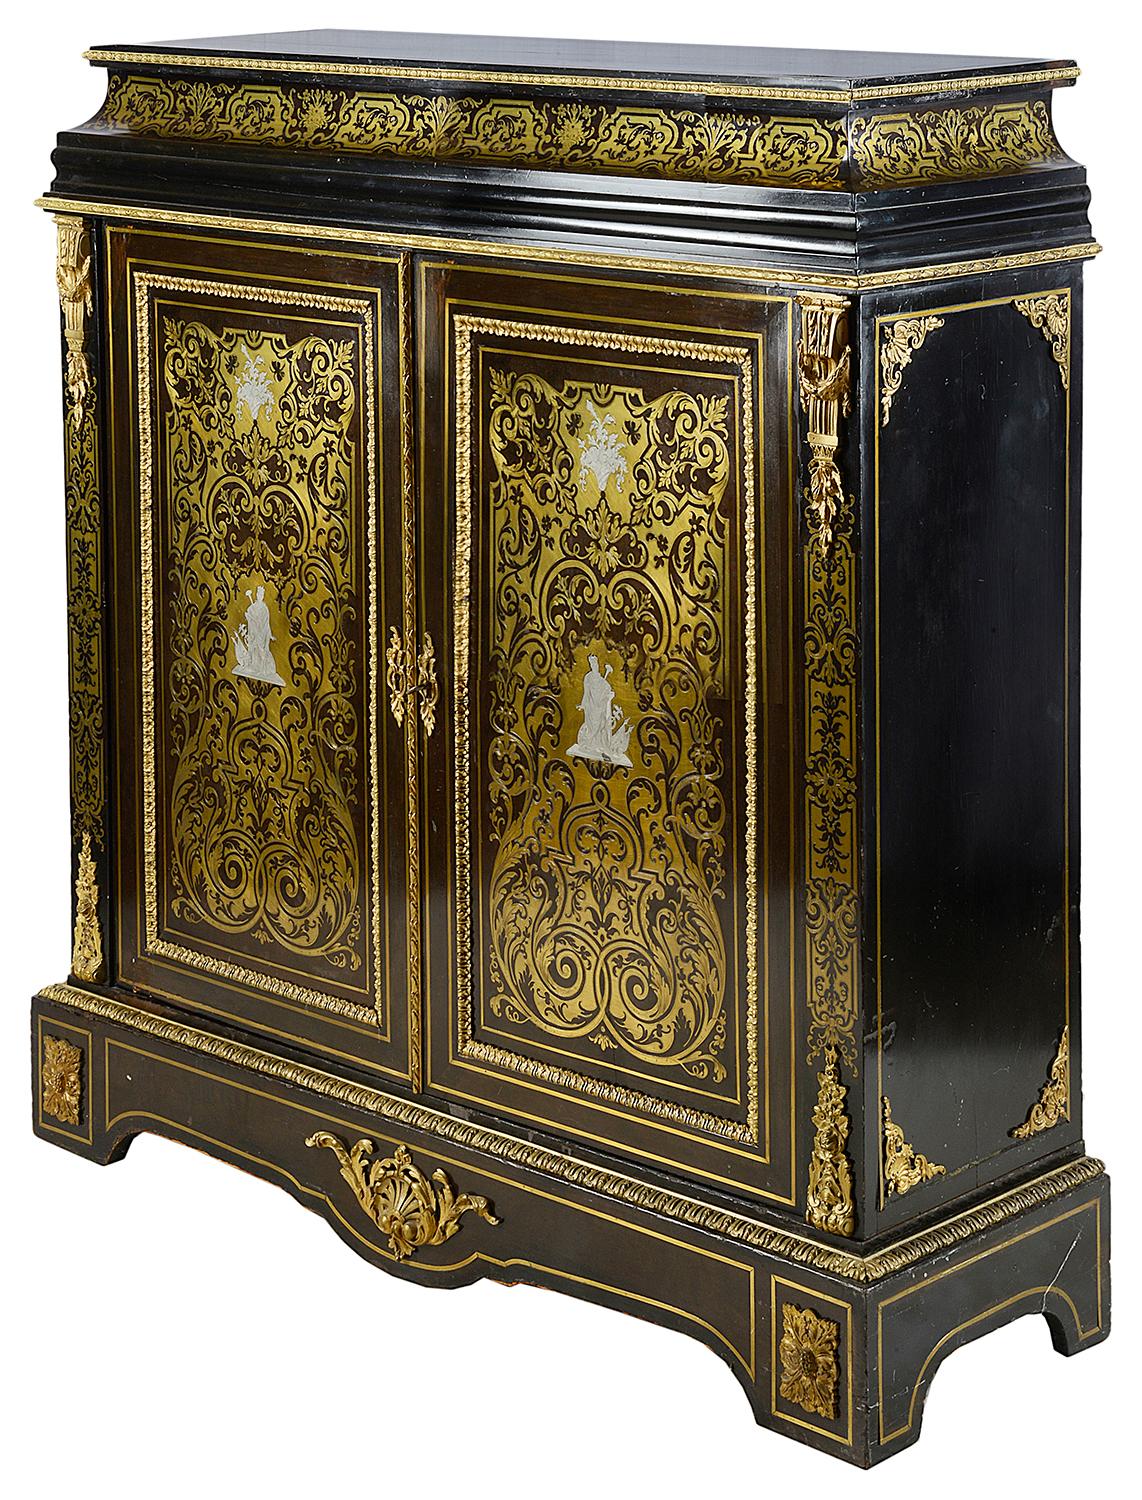 A good quality 19th Century French Boulle brass inlaid side cabinet, having classical scrolling foliate and swag decoration, gilded ormolu mounts, Pewter inlay to the centre of the doors, depicting classical figures. The pair of doors opening to